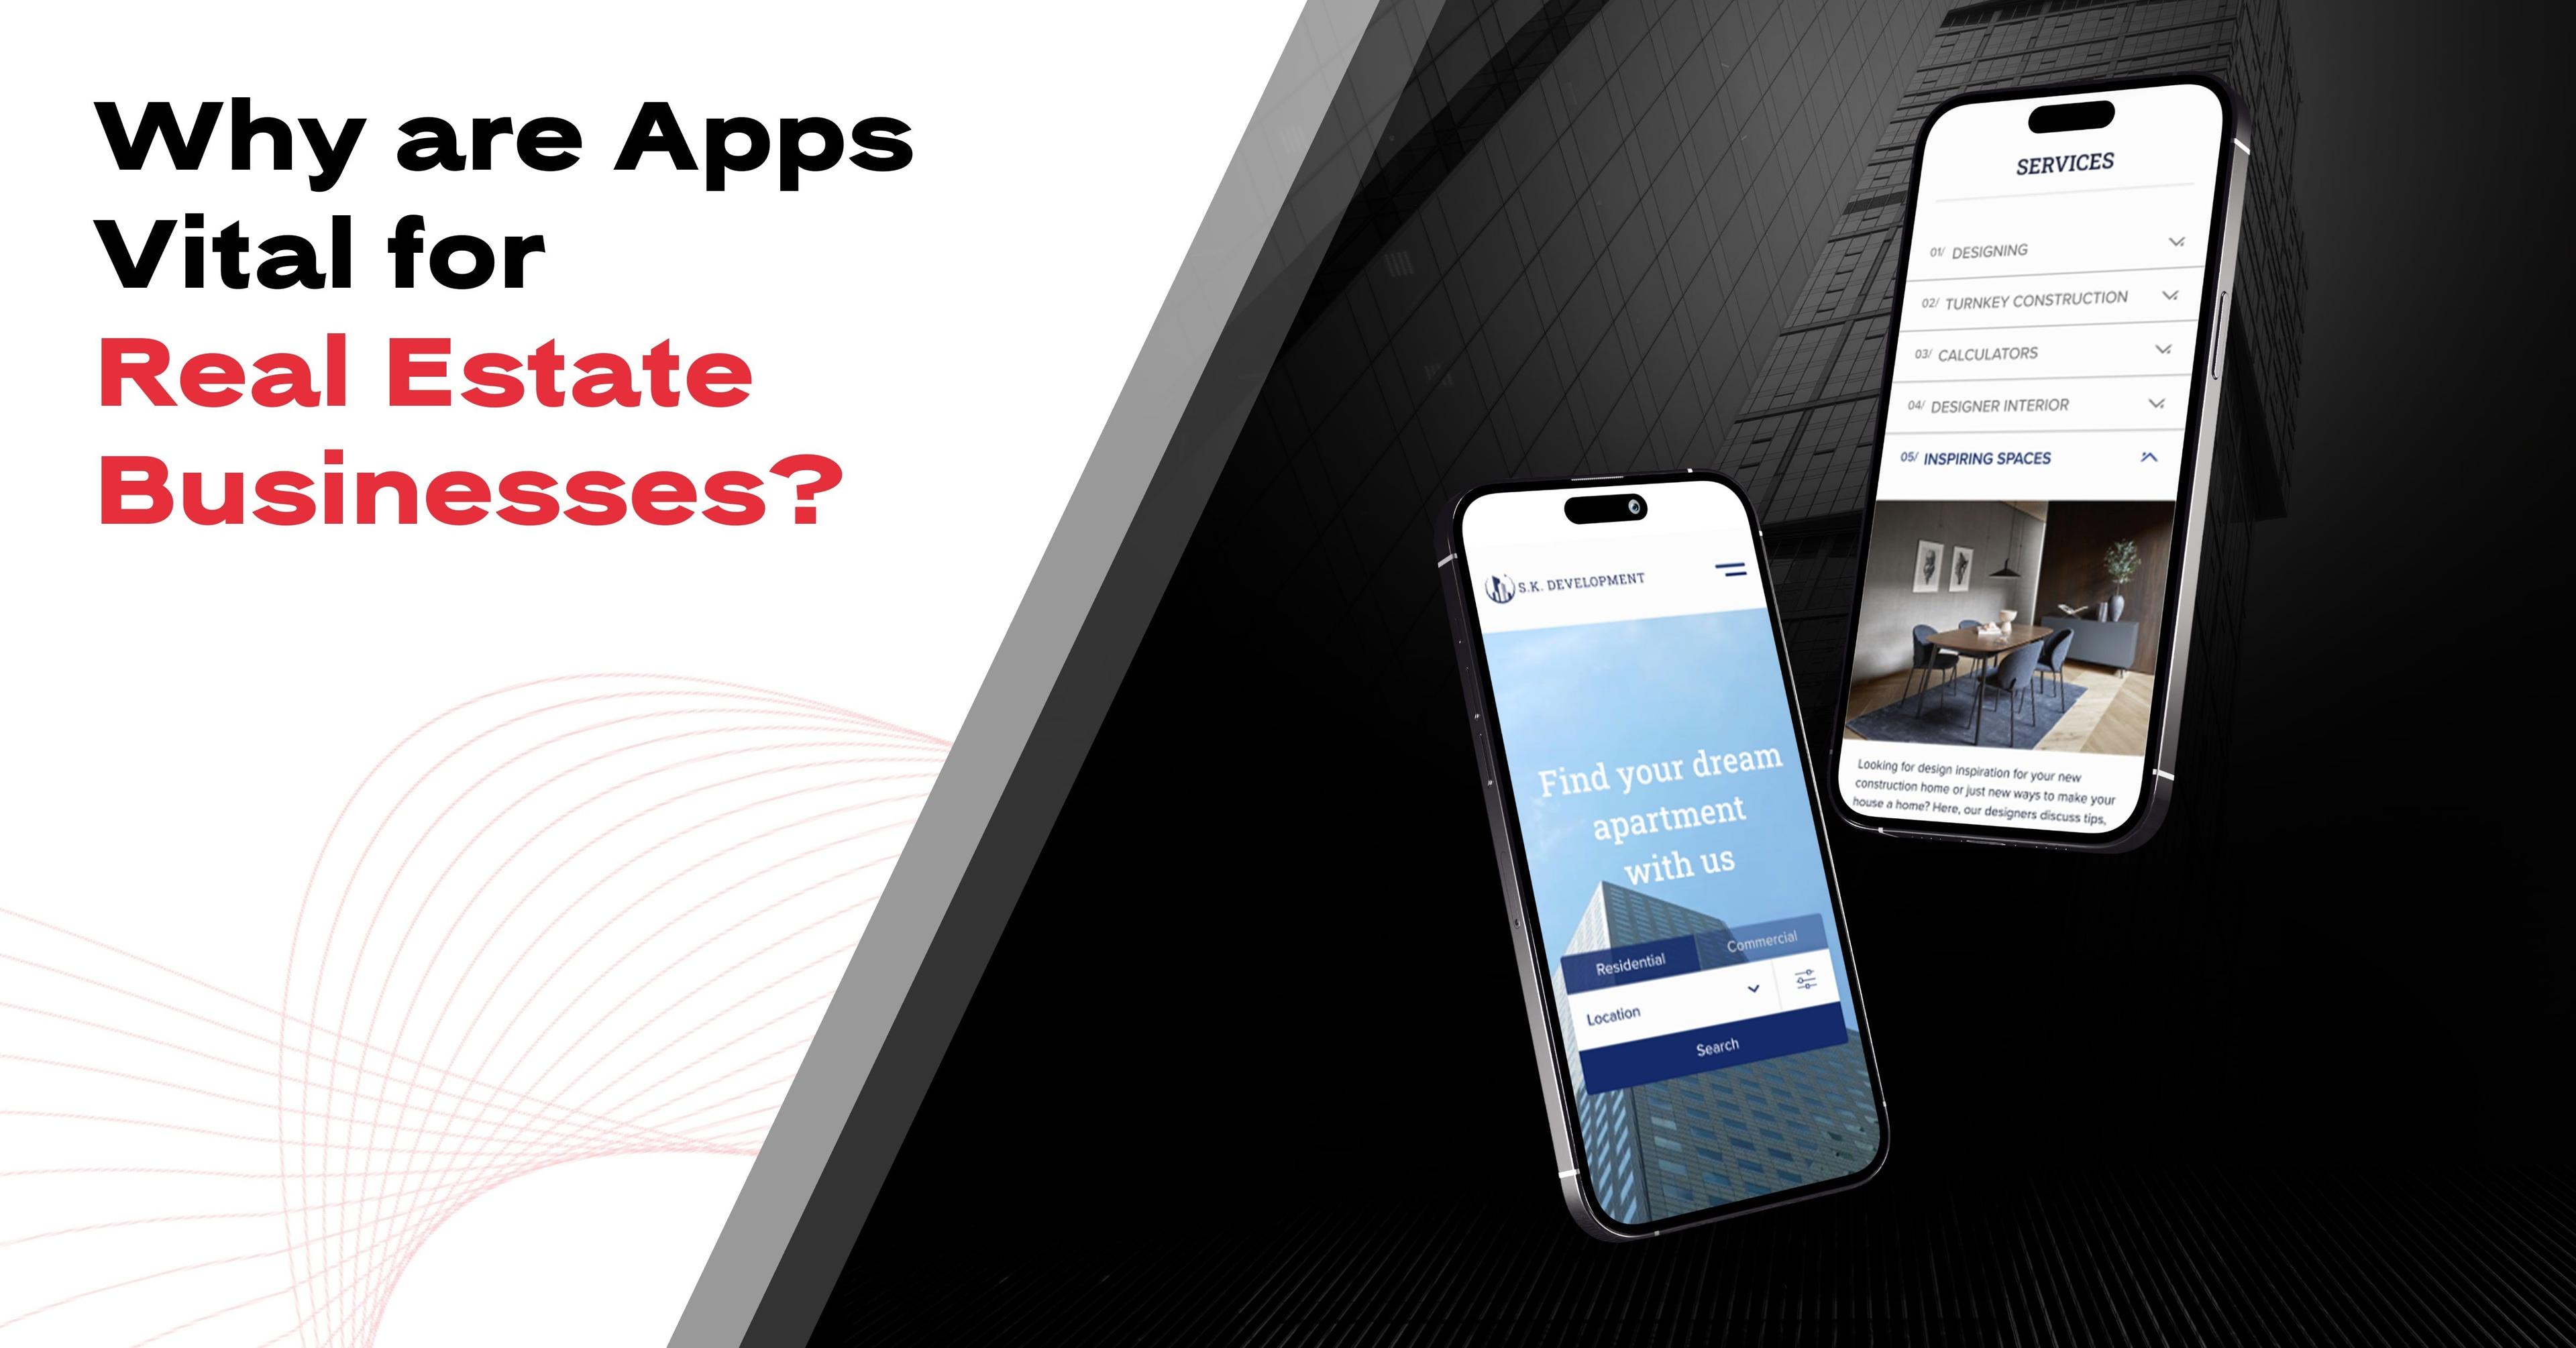 Why are apps vital for real estate businesses?